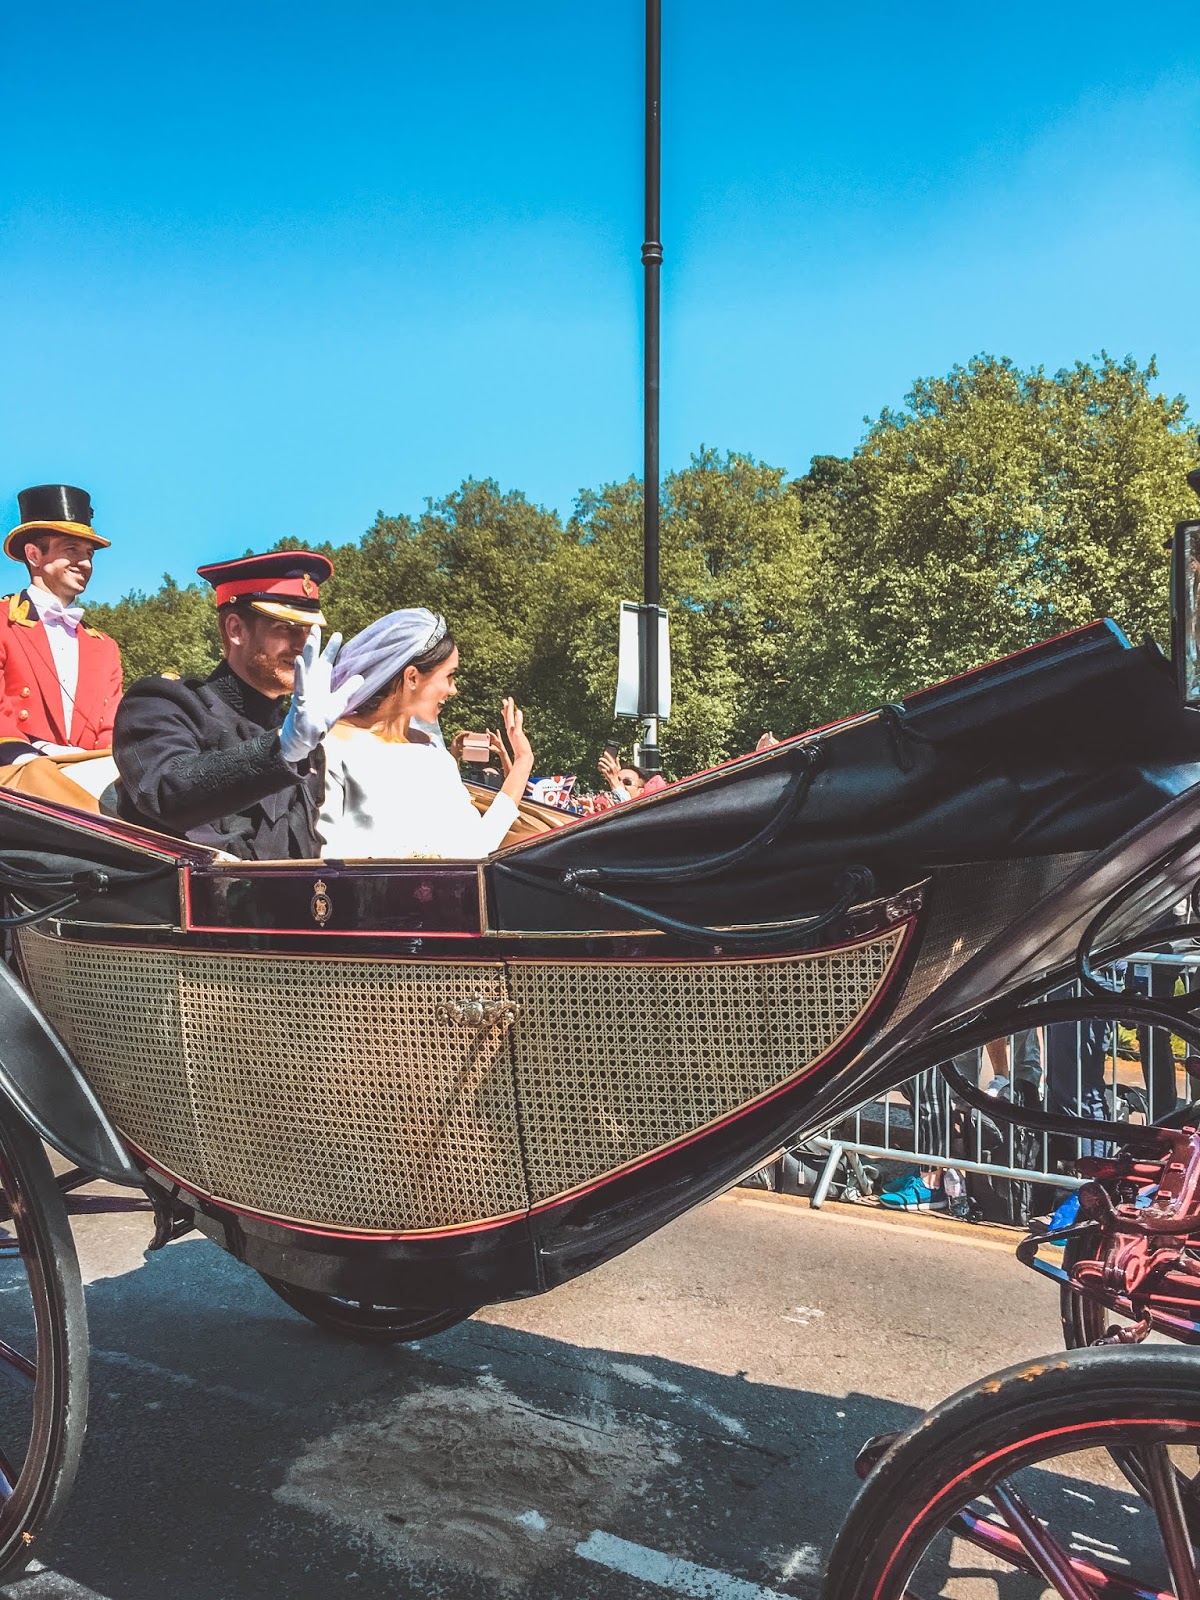 prince-harry-and-meghan-markle-in-carriage